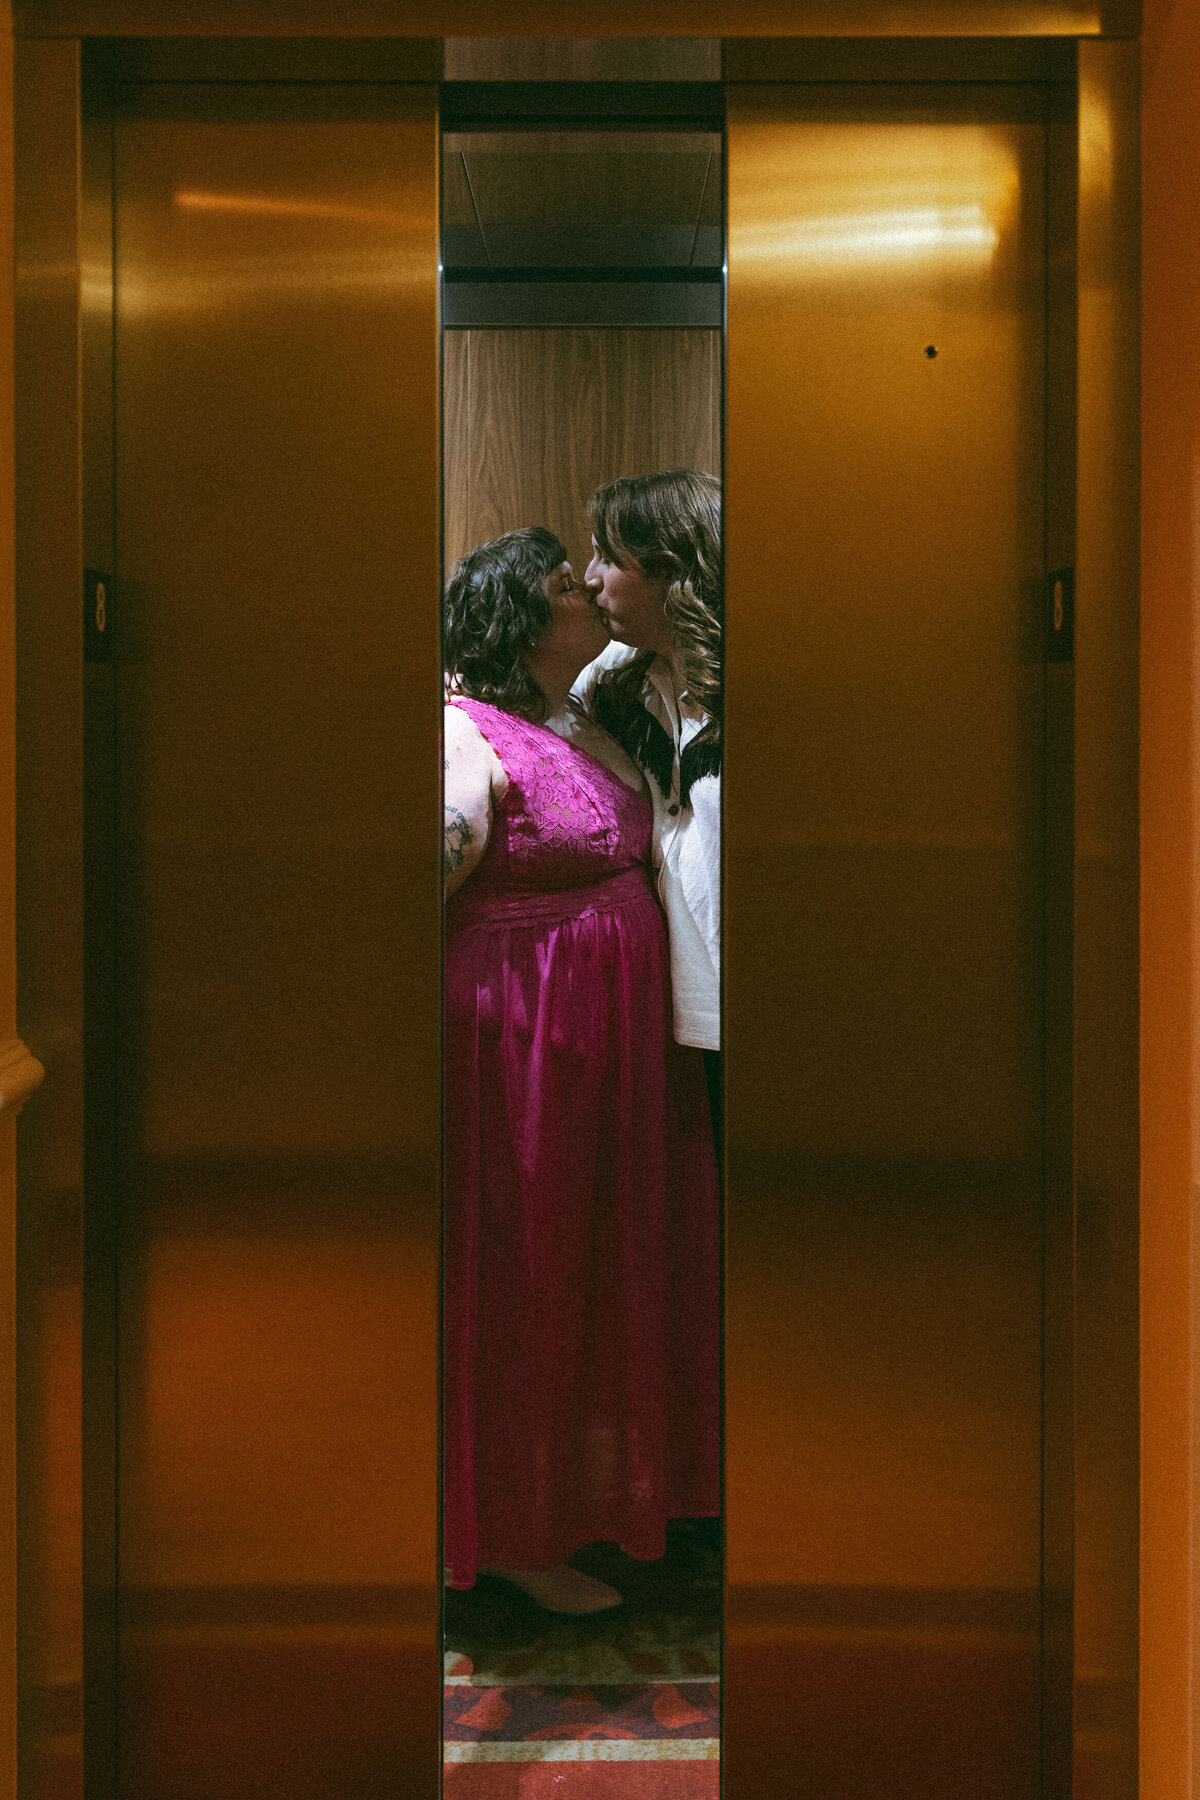 Two women sharing a moment in an elevator with warm lighting, one in a pink dress and the other in a white blouse